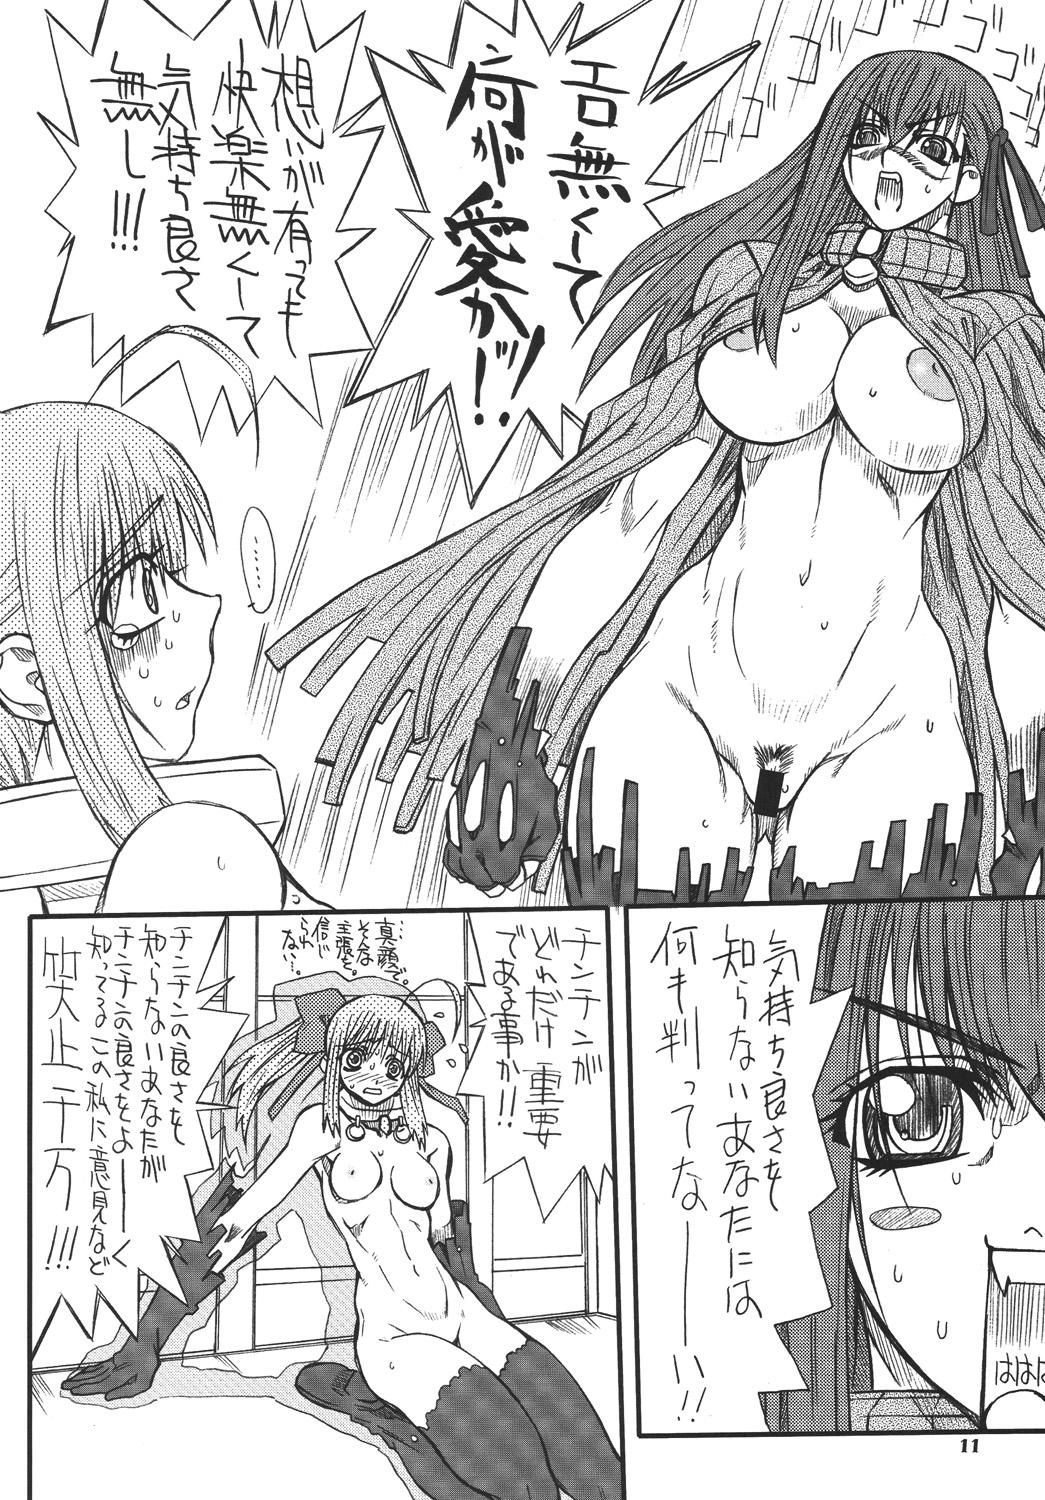 Mouth Akihime Yon - Fate stay night Blowjob Contest - Page 10